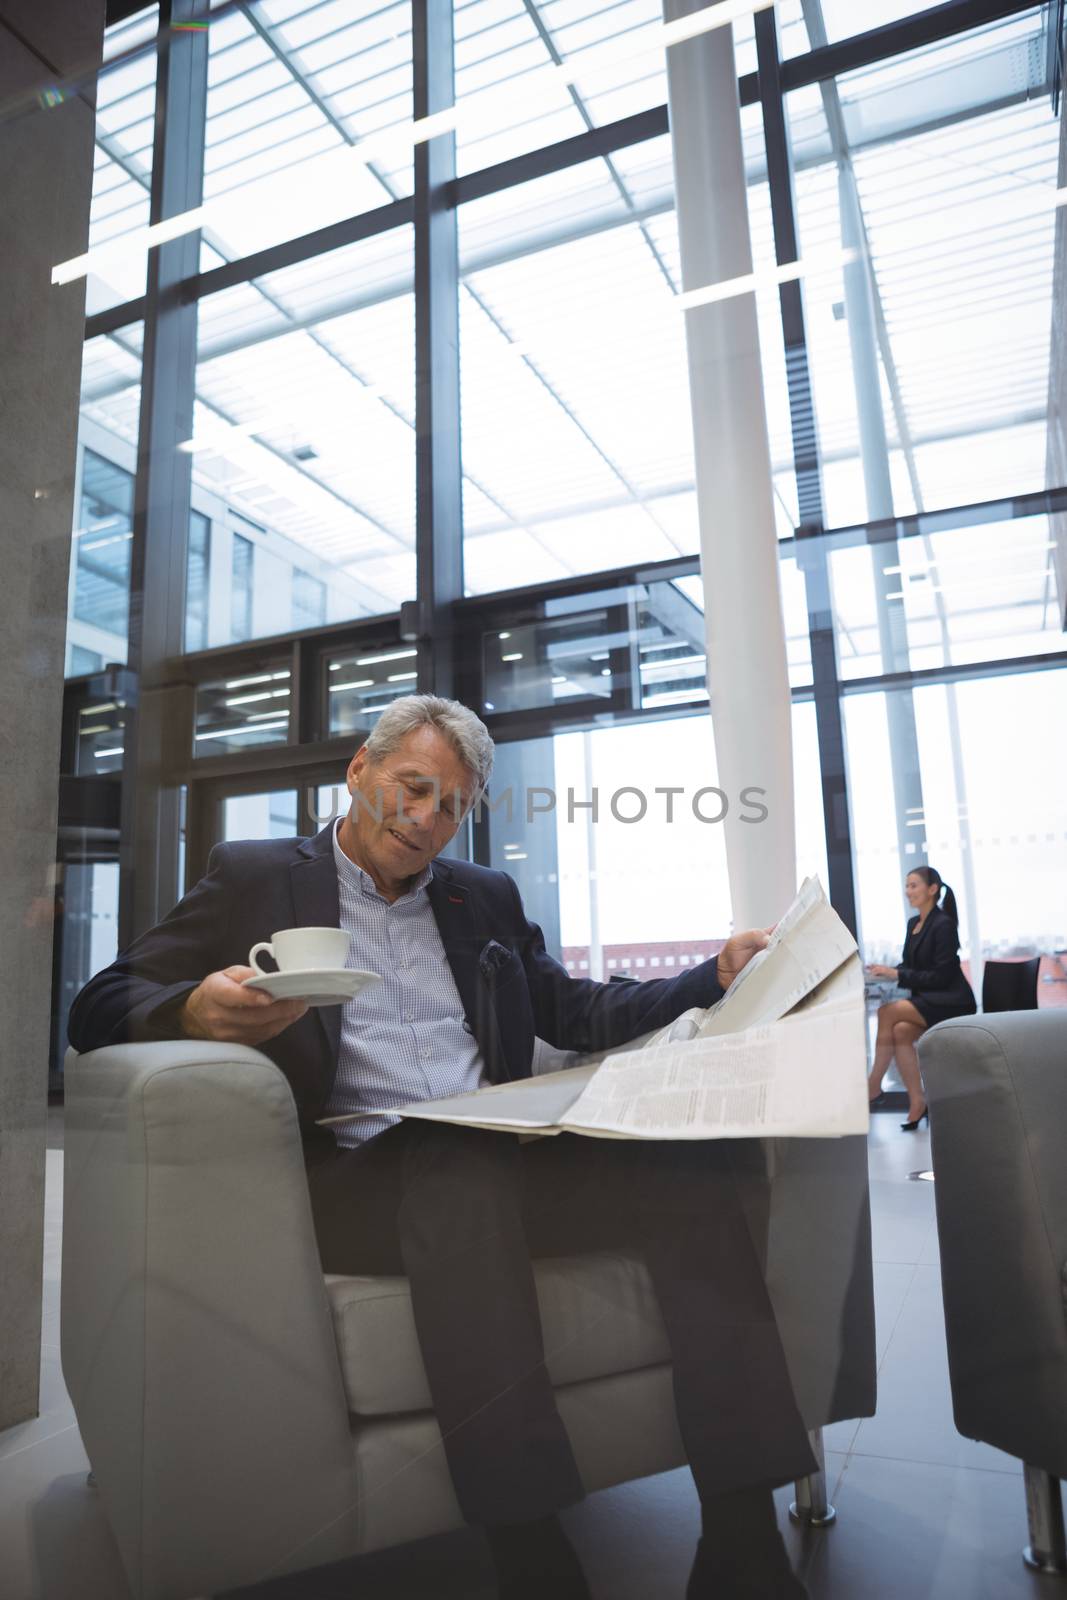 Businessman reading newspaper while having coffee in office